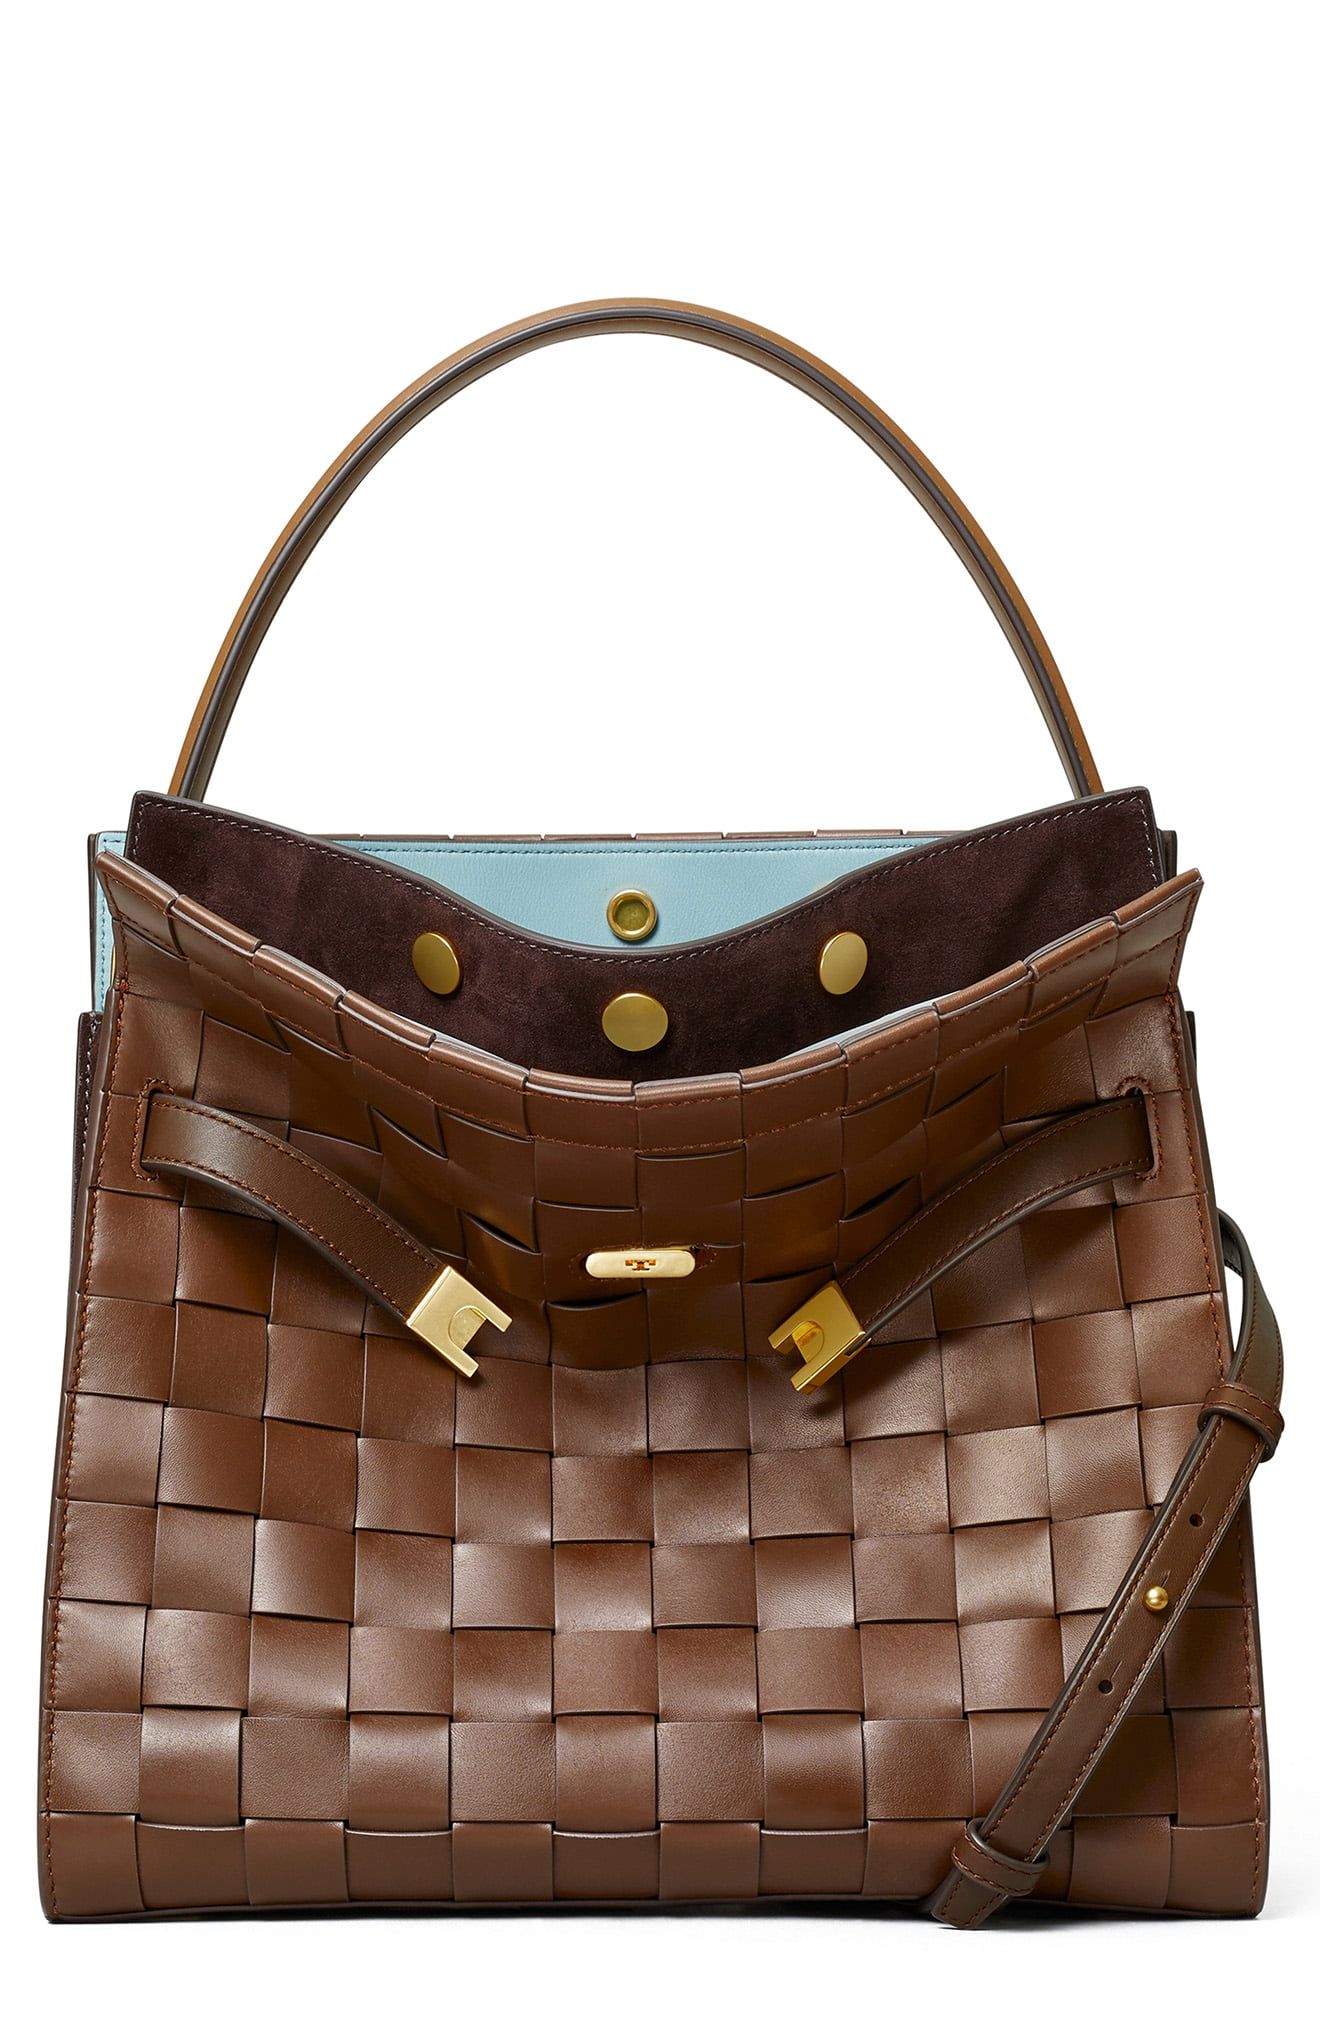 Tory Burch Lee Radziwill Woven Leather Double Bag - Brown